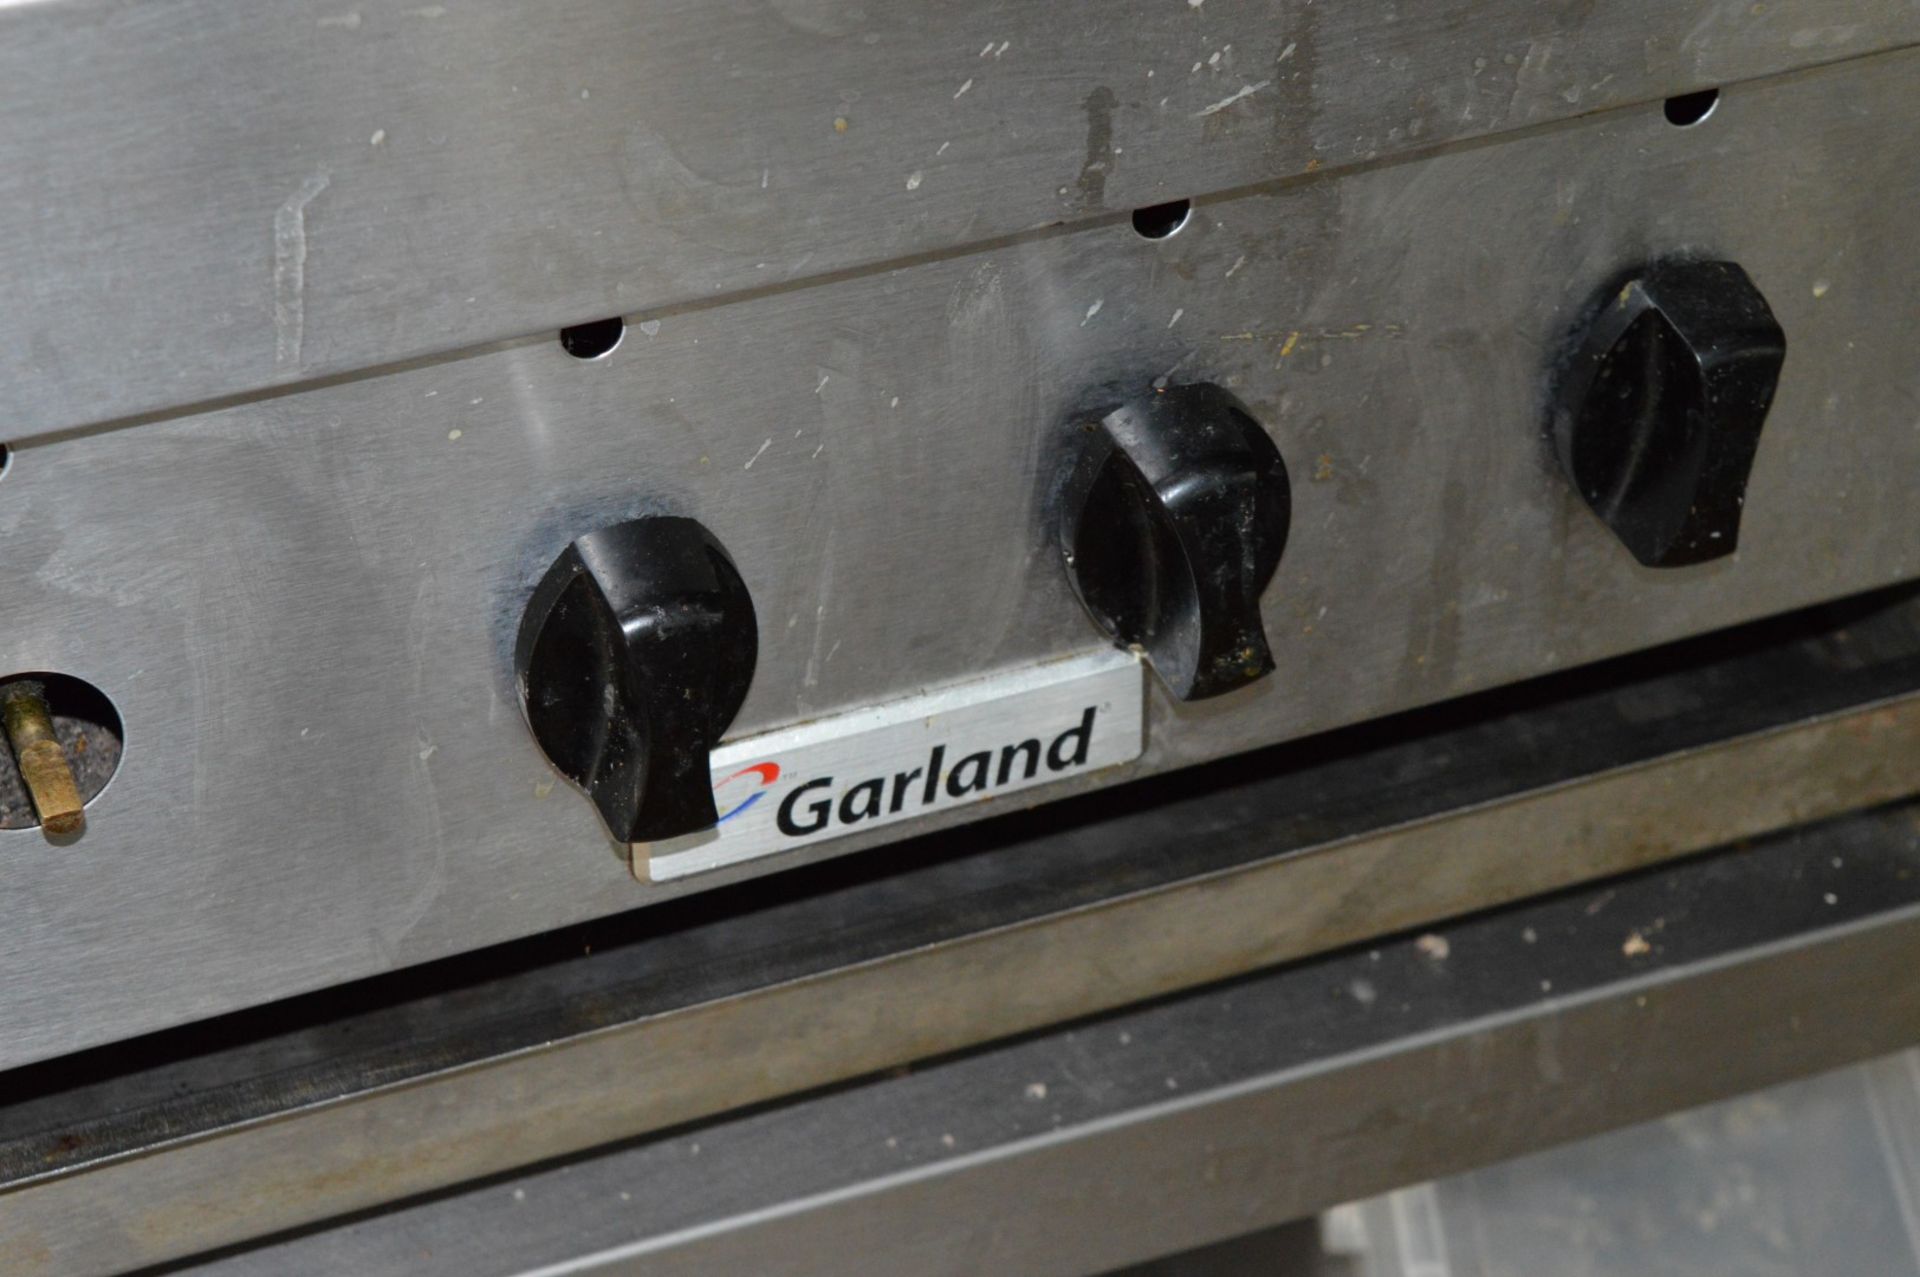 1 x Garland Stainless Steel Griddle With Stand - H91 x W85 x D75cms - CL245 - Dual Fuel Gas and - Image 8 of 8